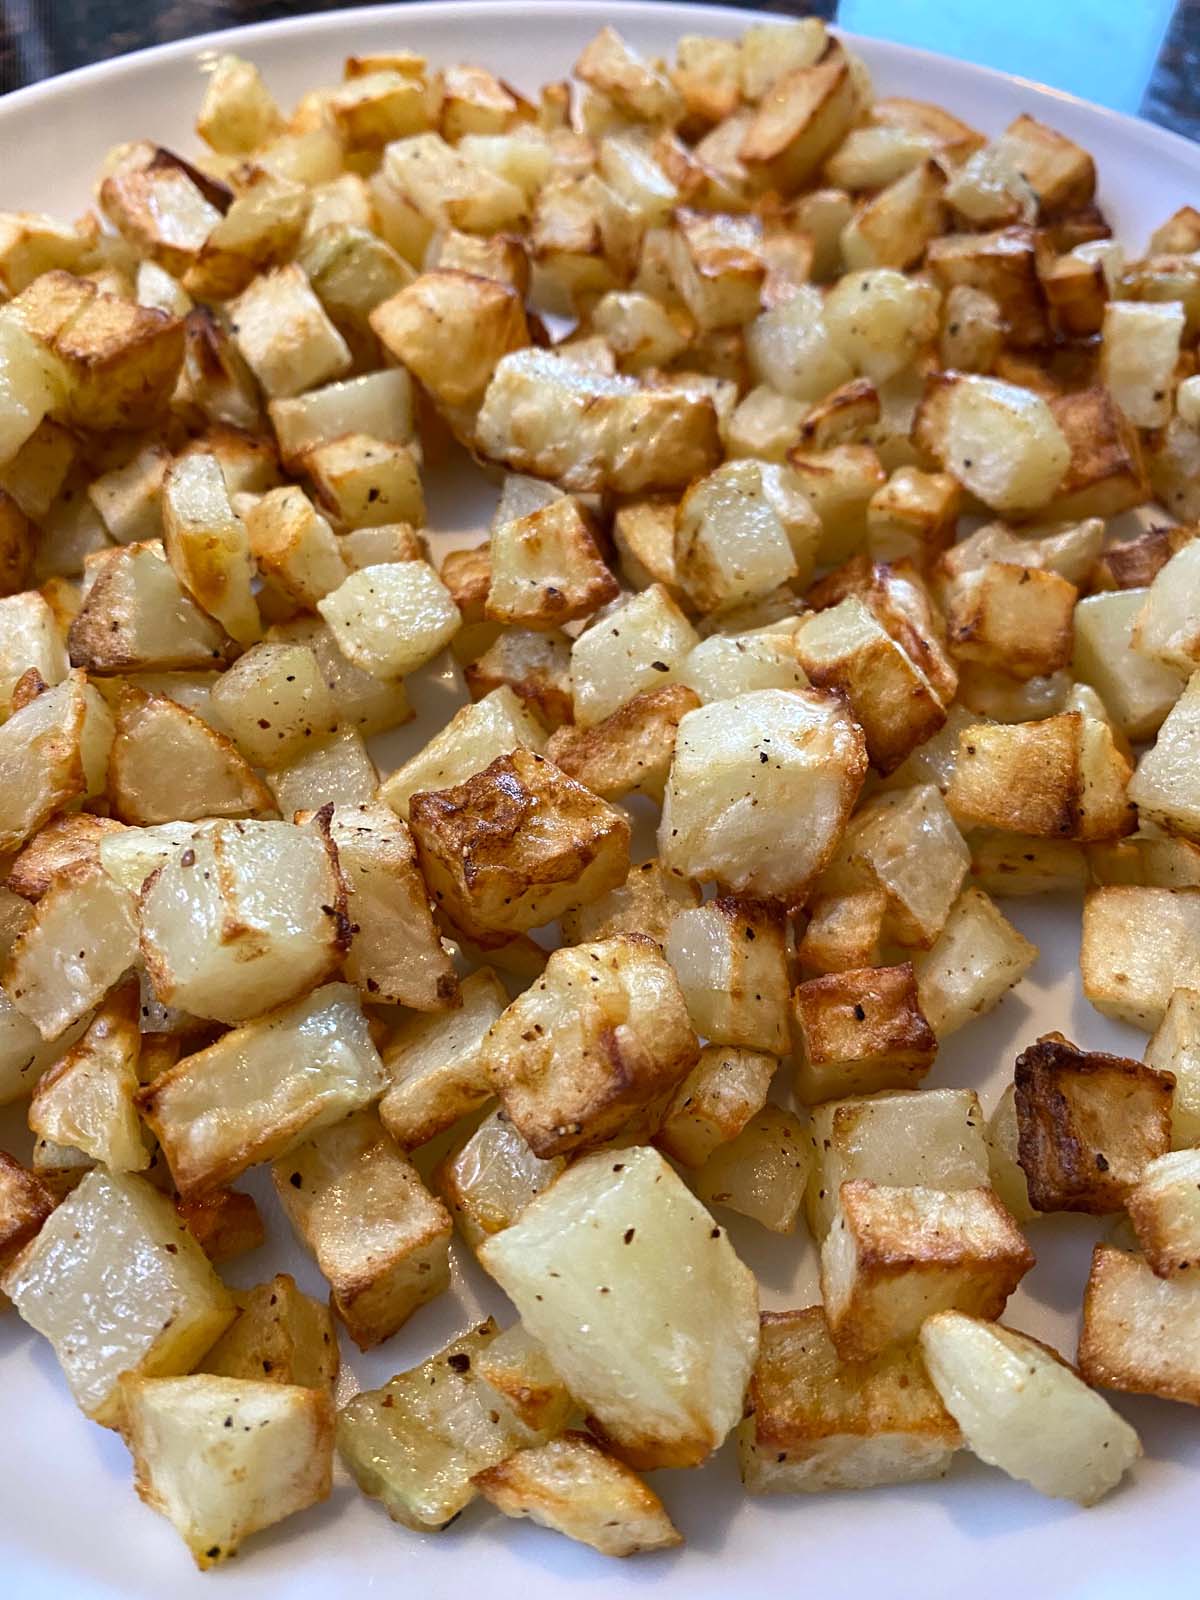 Plate of air fried diced potatoes.